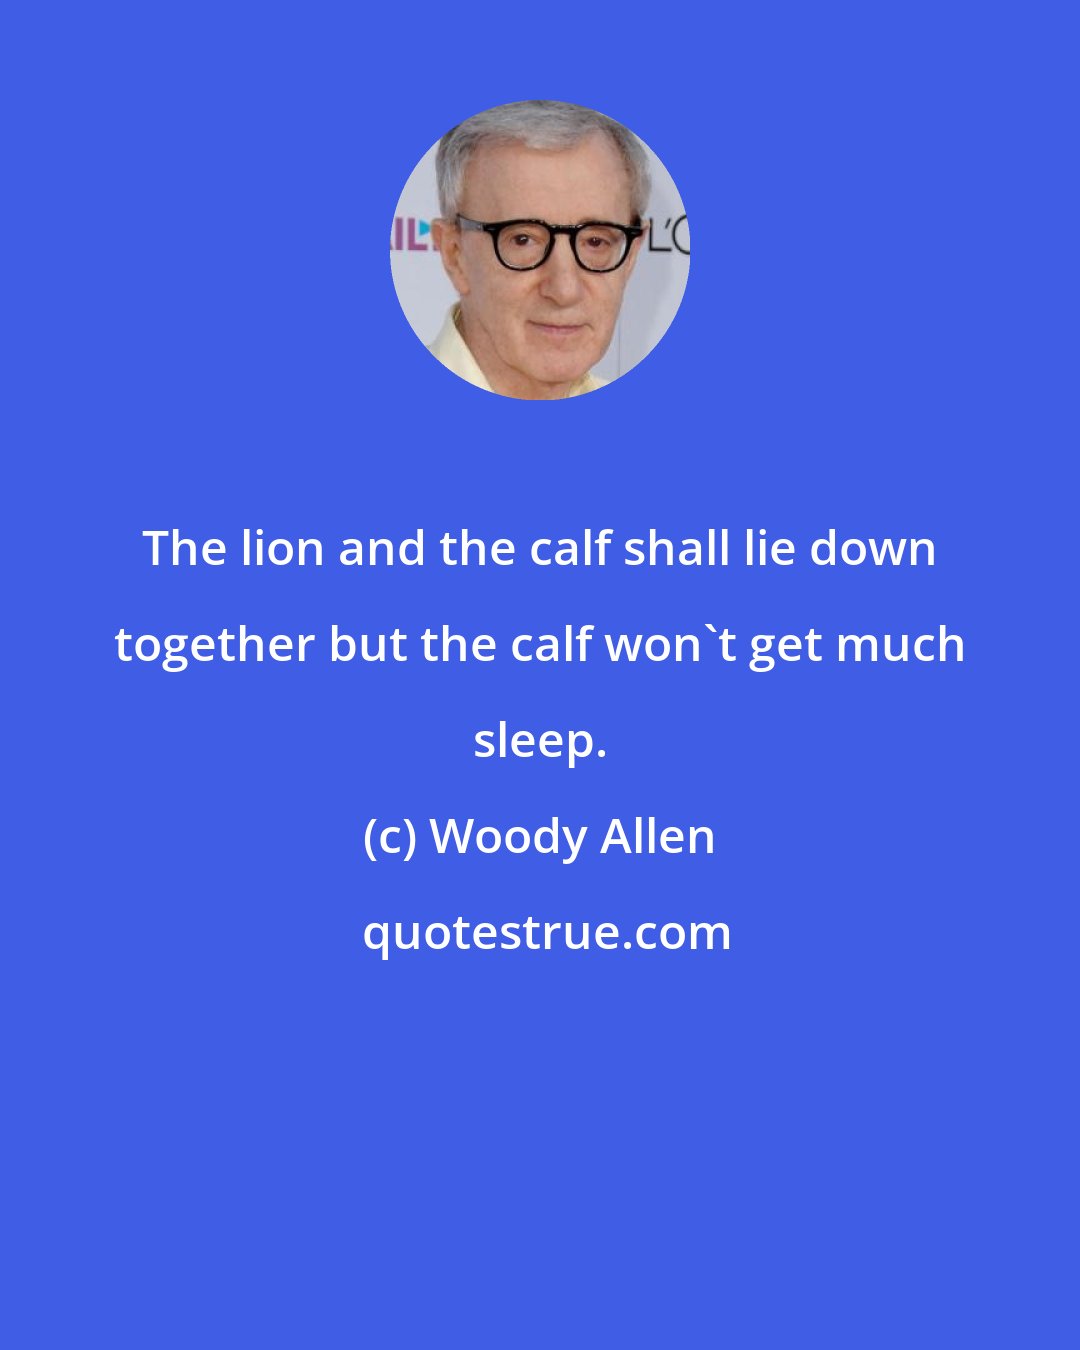 Woody Allen: The lion and the calf shall lie down together but the calf won't get much sleep.